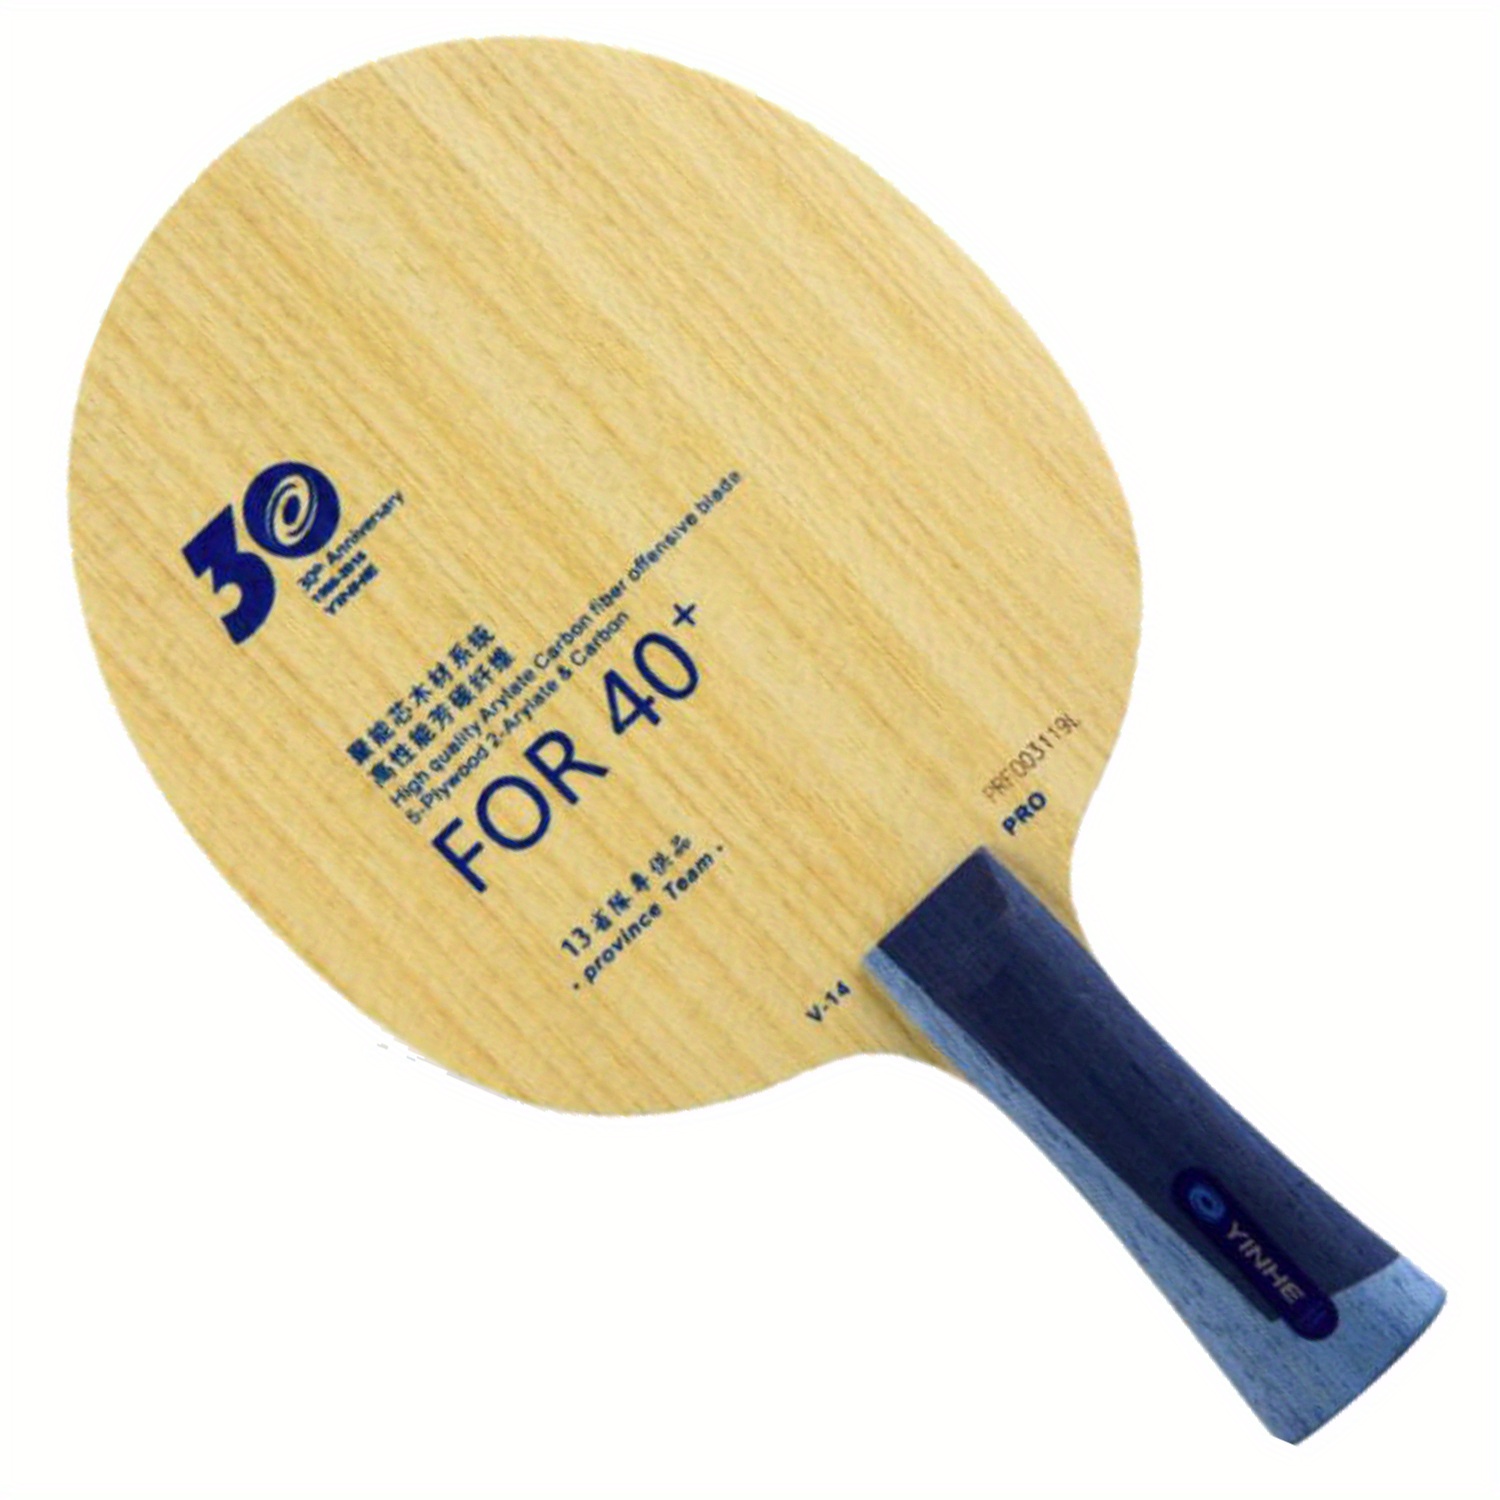 30th Anniversary V 14 Pro Table Tennis Blade With New Material 40